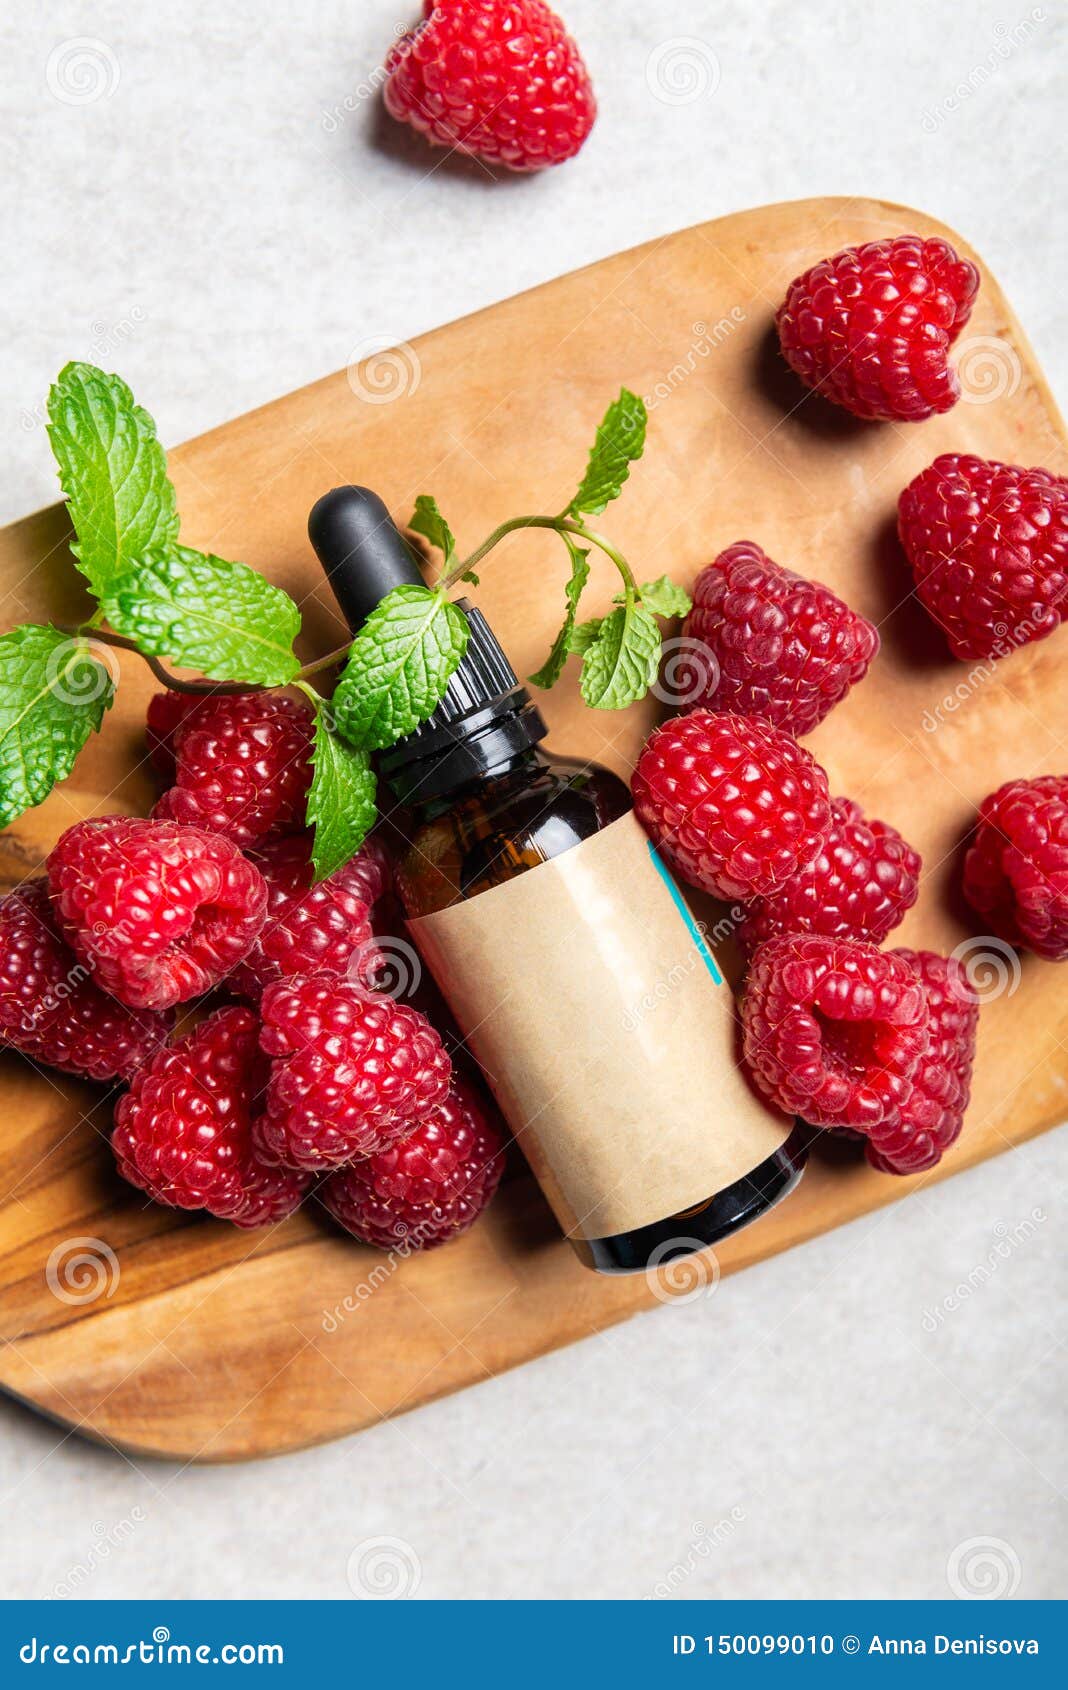 Red Raspberry Oil. Pure, Natural. Aromatherapy, Massage Base Oil, Sunscreen Stock Photo - Image of natural, 150099010